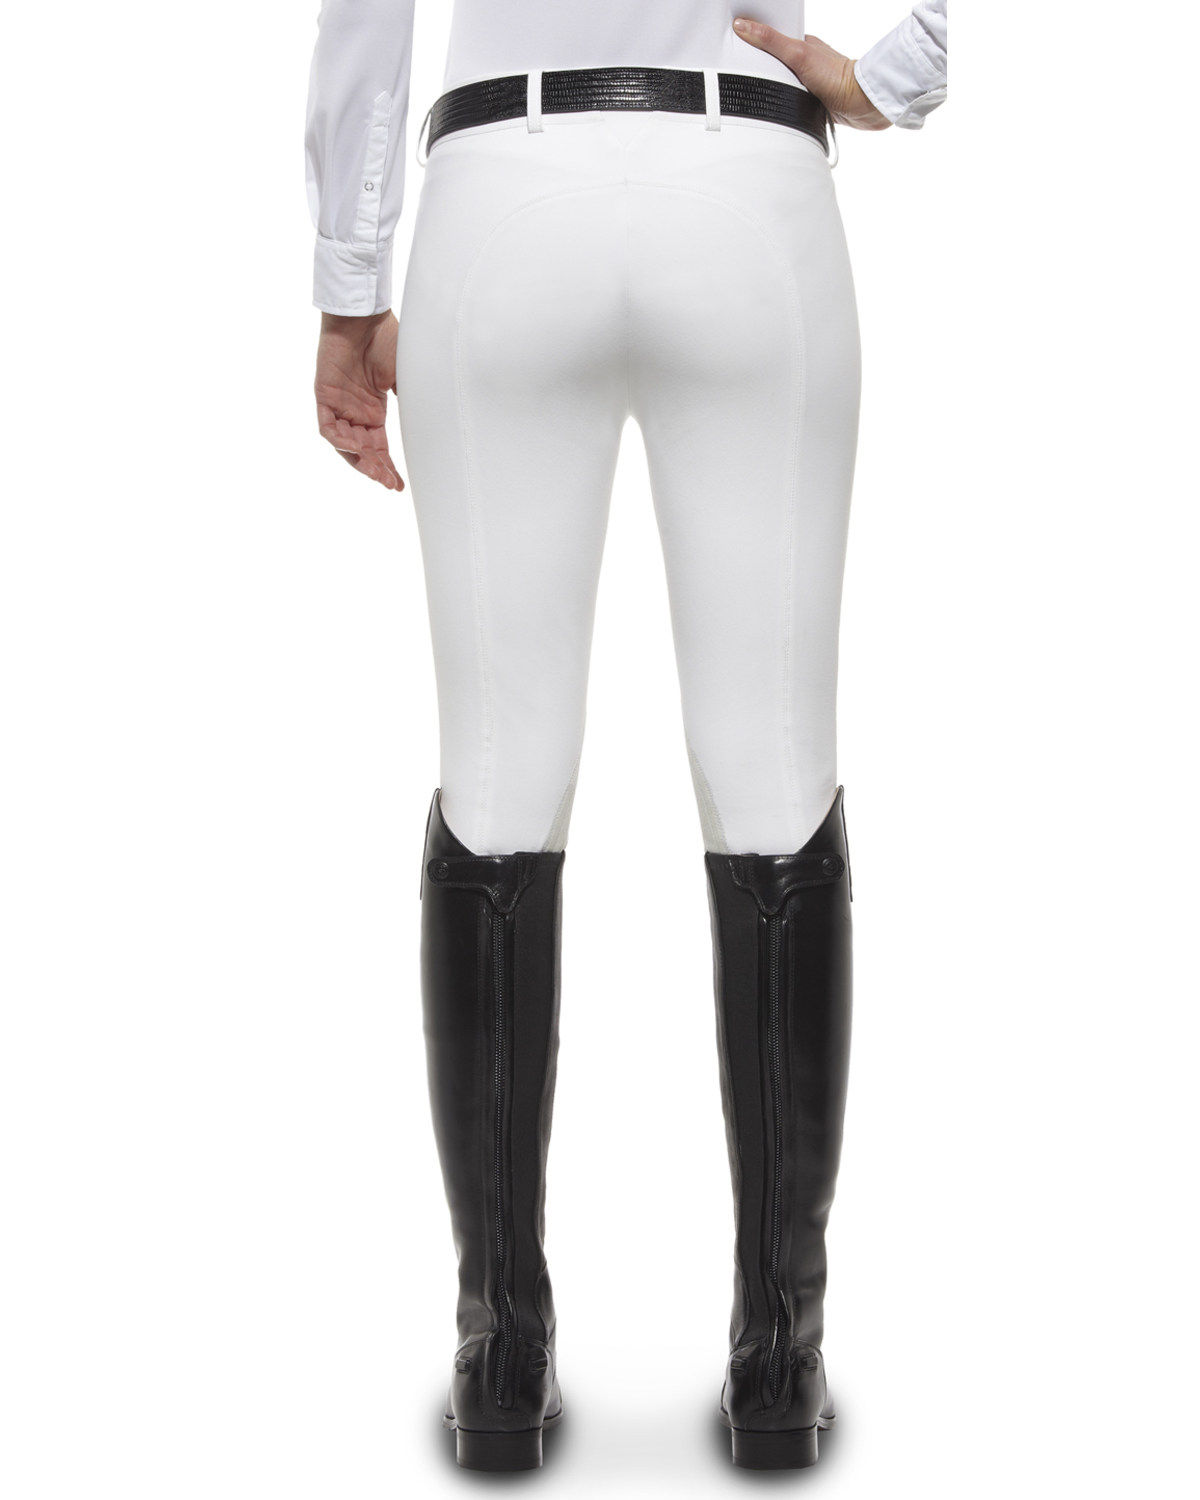 Ariat Women's Olympia Zip-Front Low Rise Knee Patch Breeches